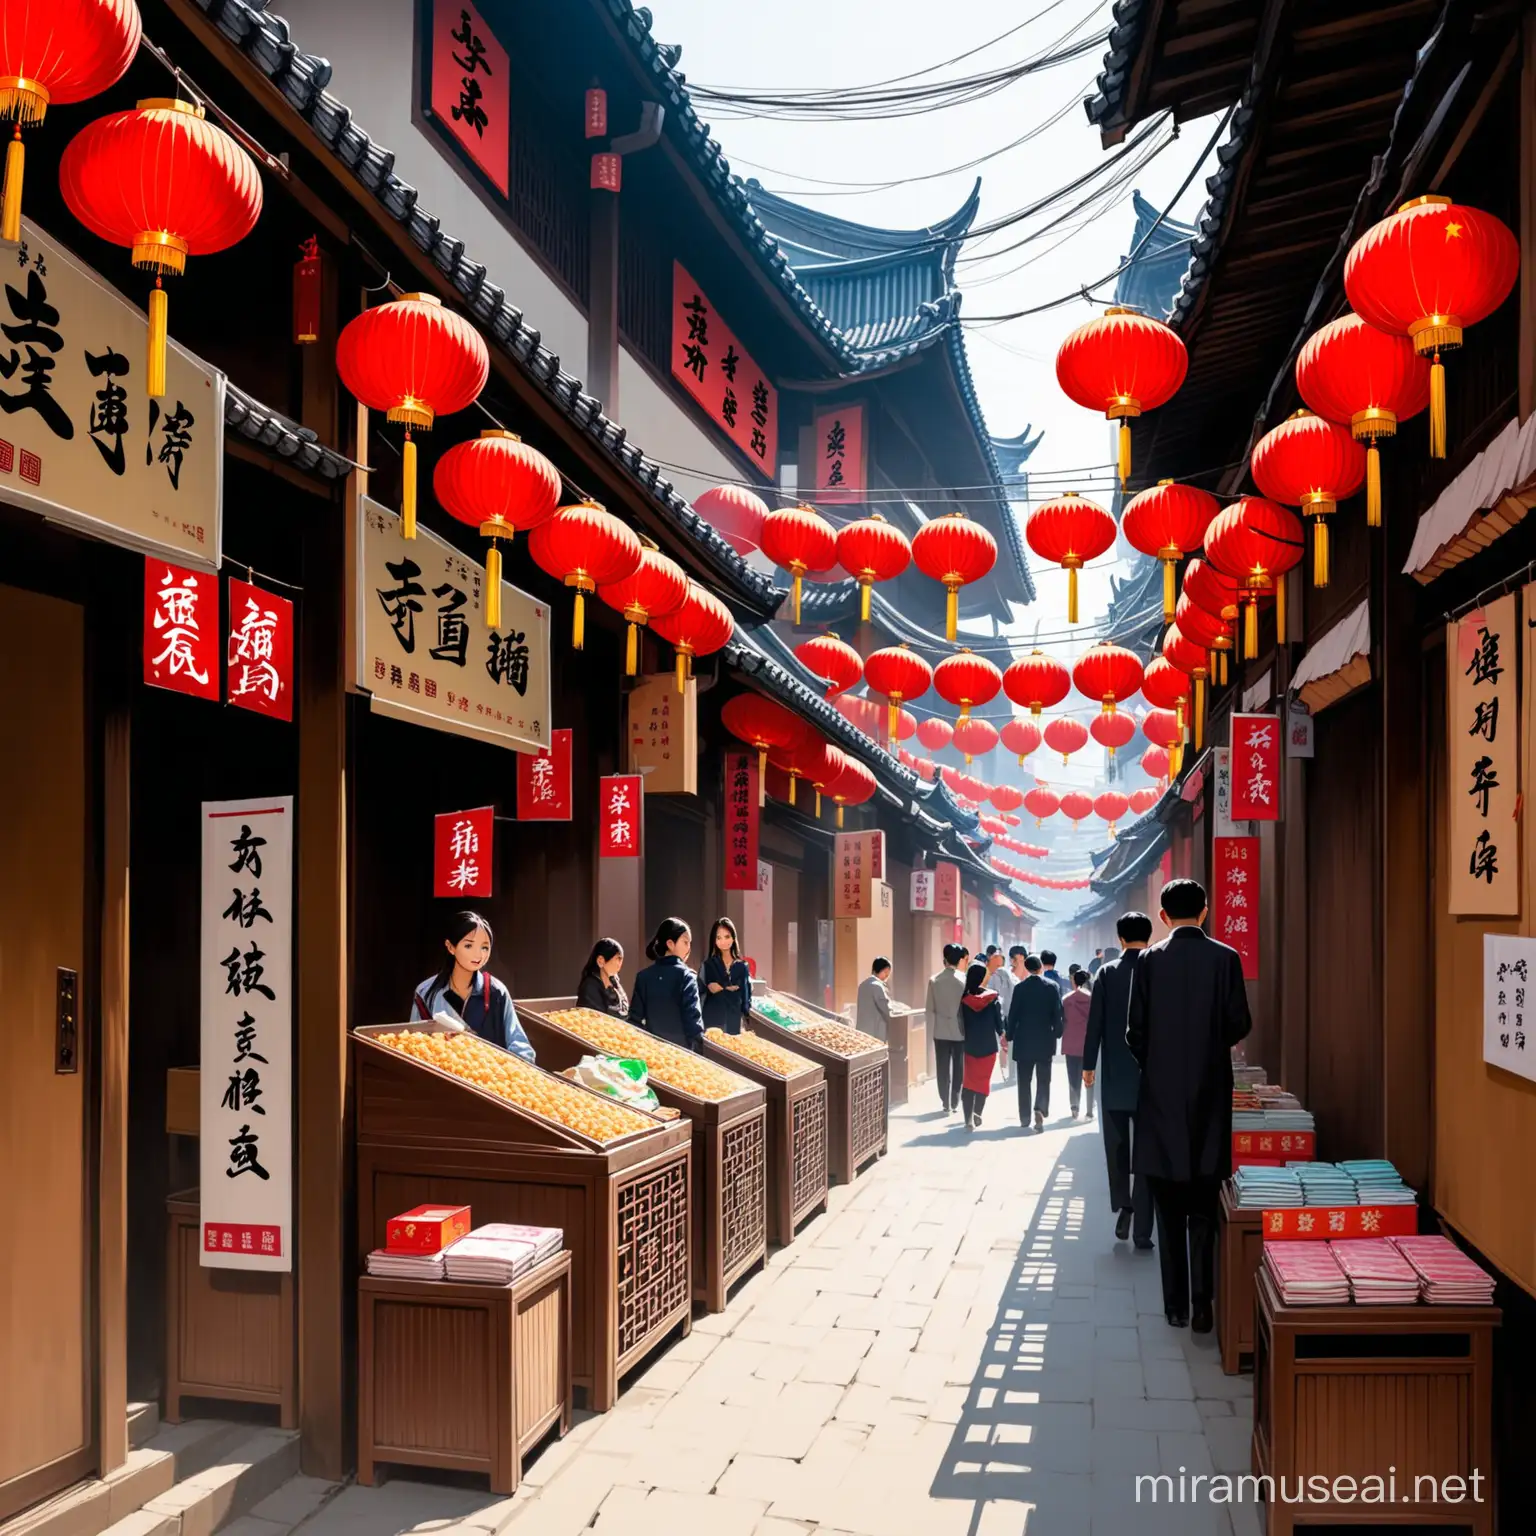 Busy Chinese Narrow Alleyway with Colorful Kiosks and Crowds